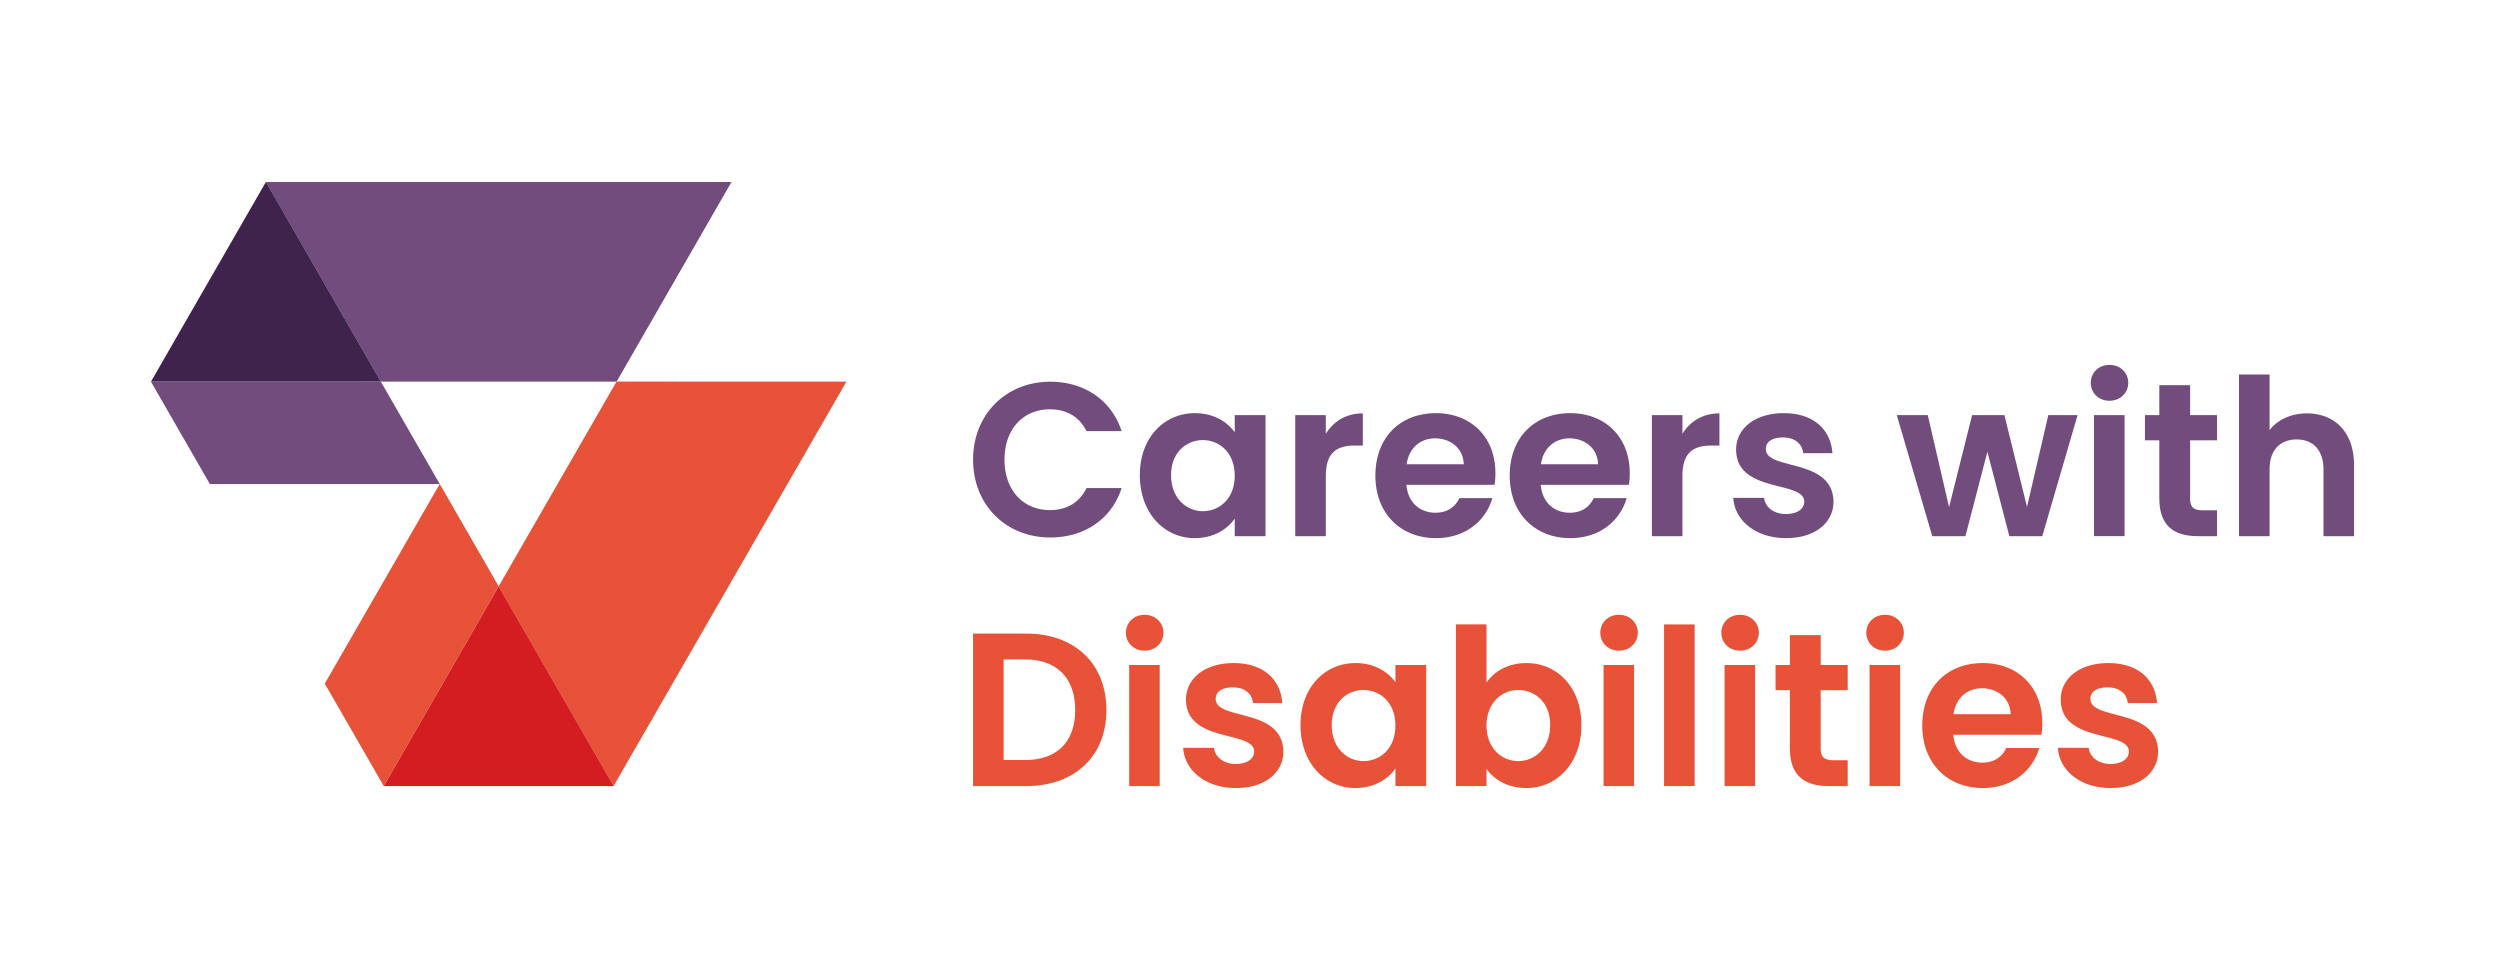 careers with disabilities 